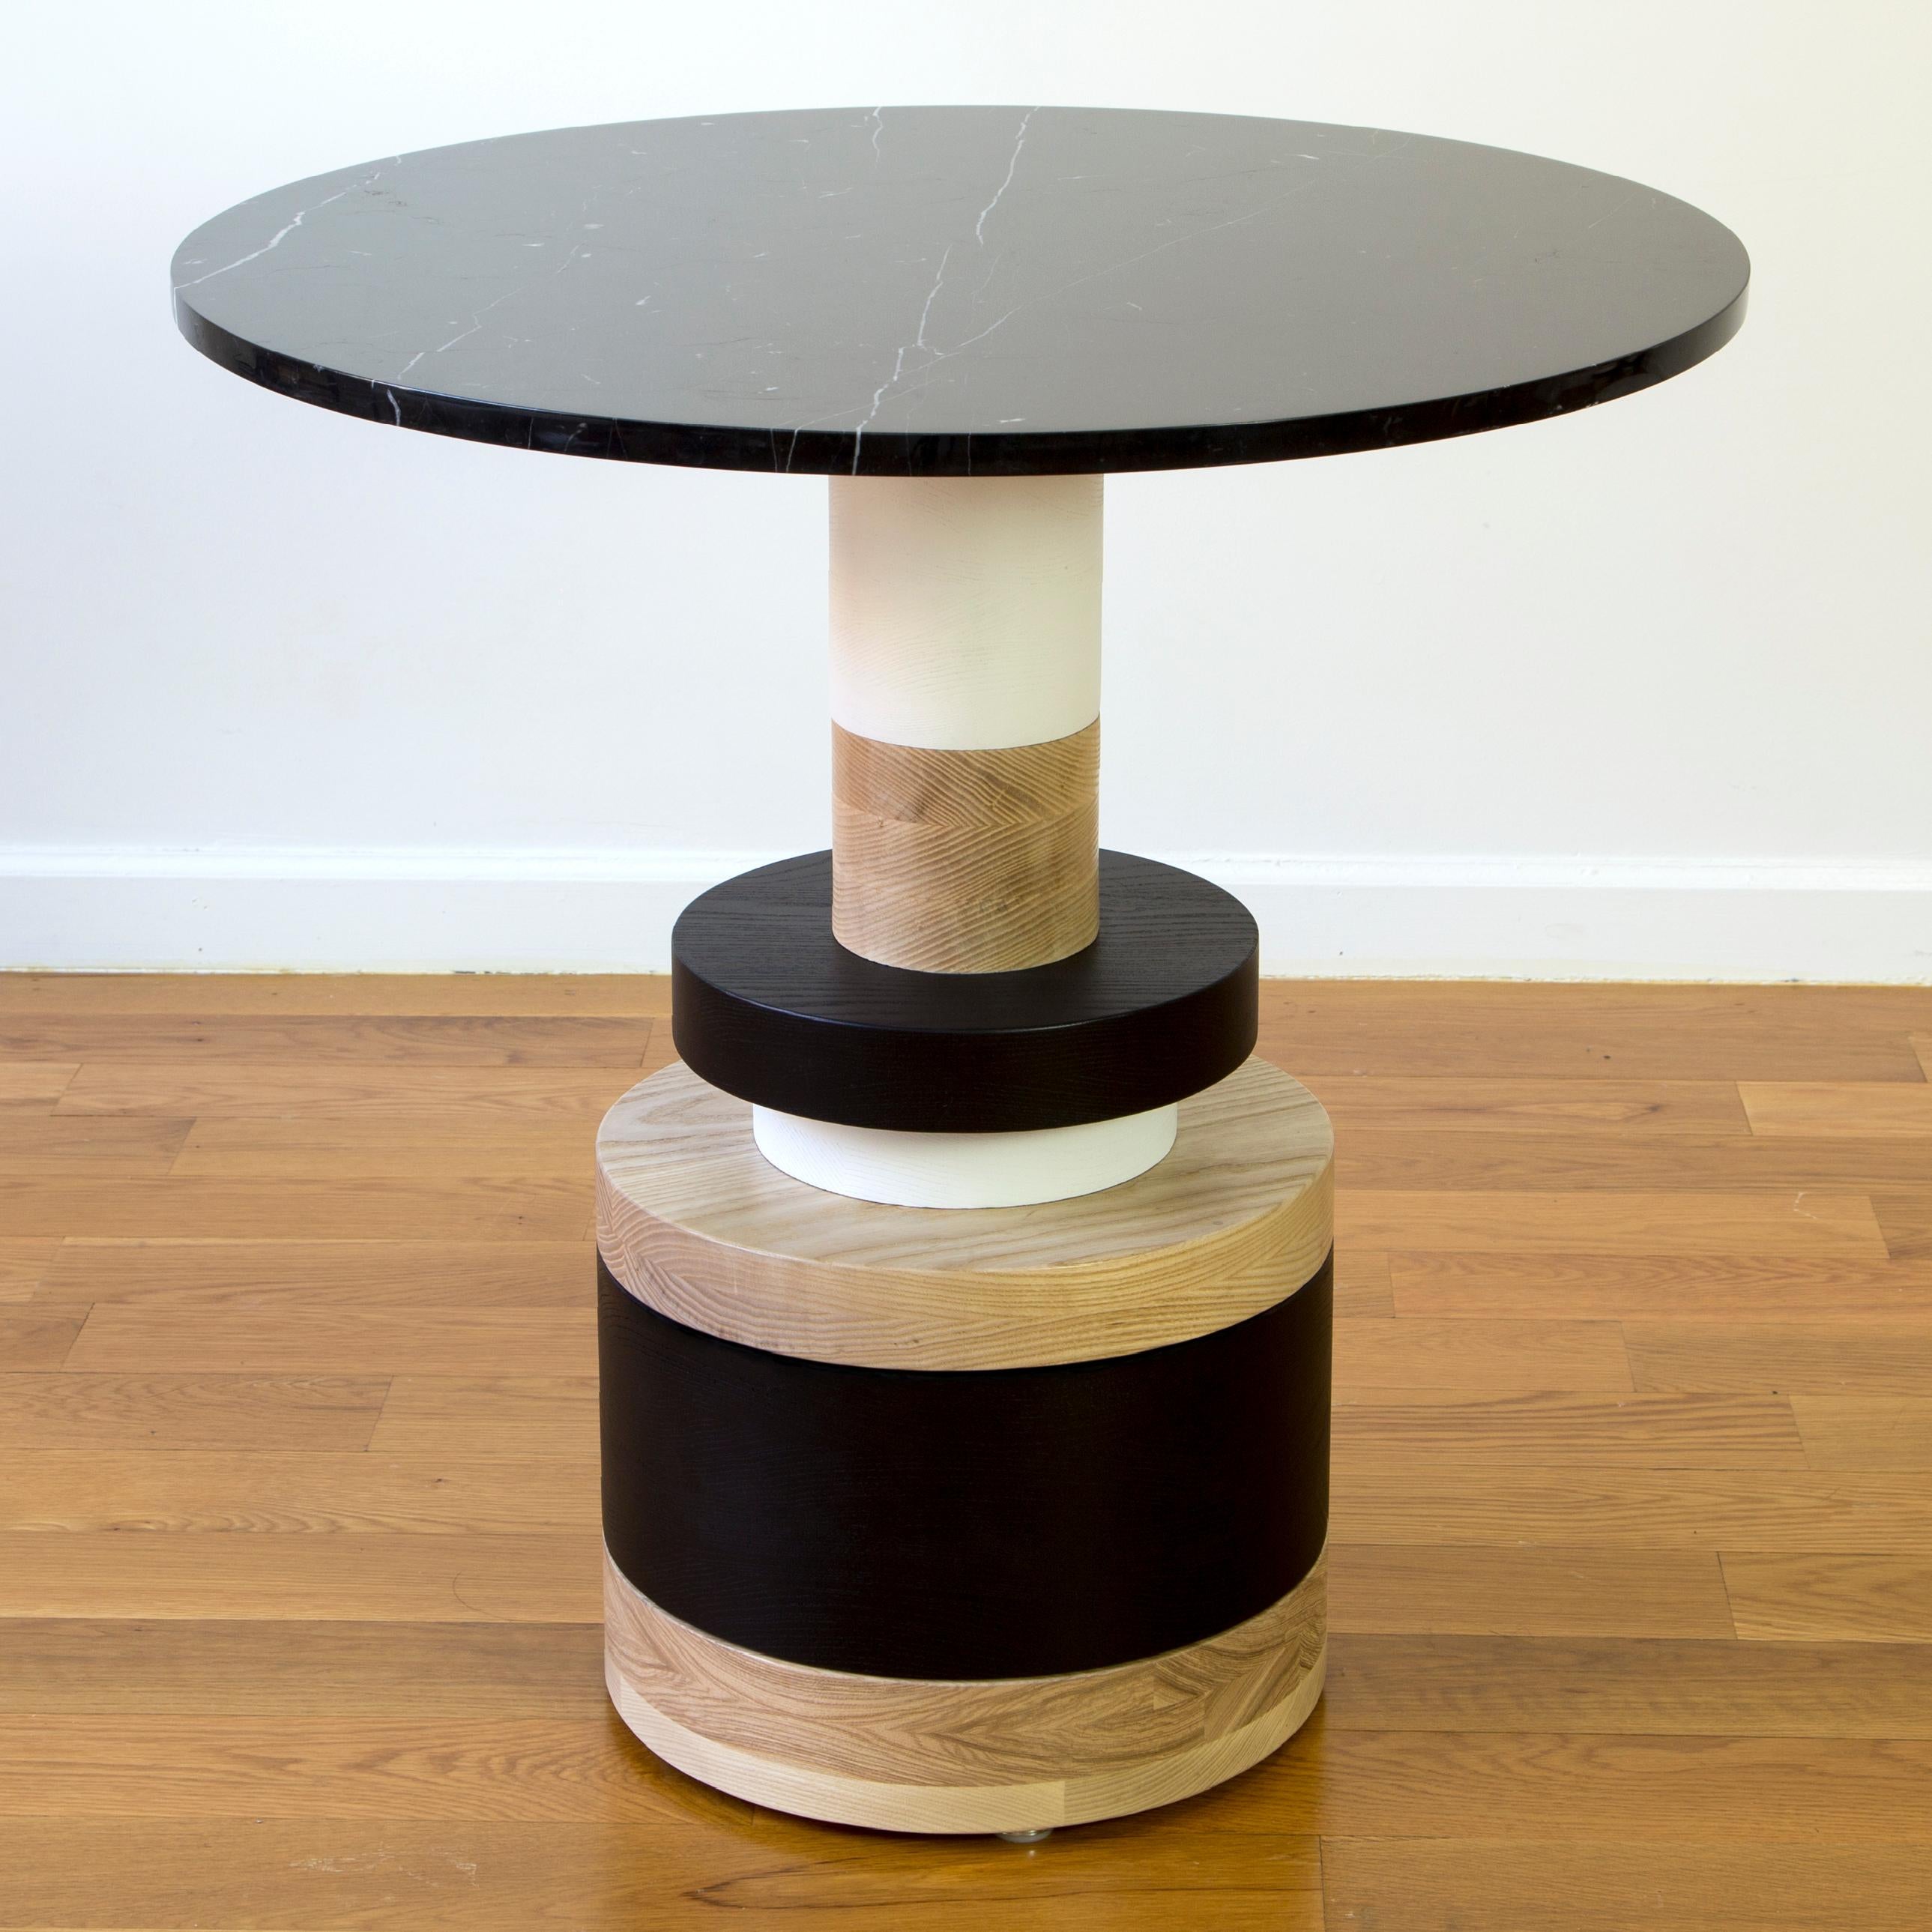 The Sottsass-inspired “Sass Dining Table” is a bold, graphic statement piece. A honed Carrara marble top sits on an Amish-made base composed of painted and stacked wood circles. Made to order.

The version as shown is 30